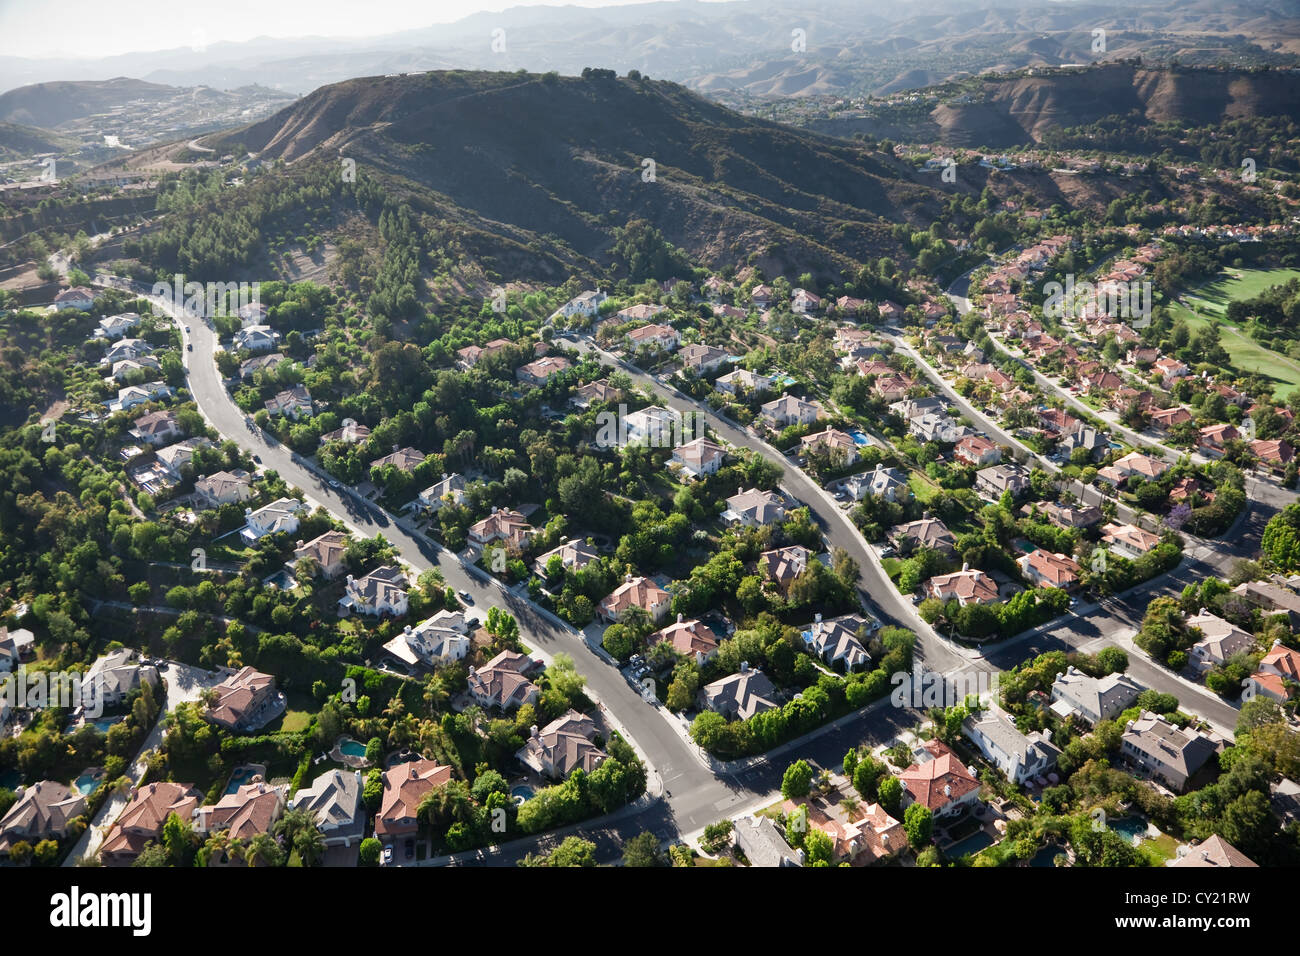 Aerial view of the neat suburb of Calabasas, Los Angeles, California Stock Photo